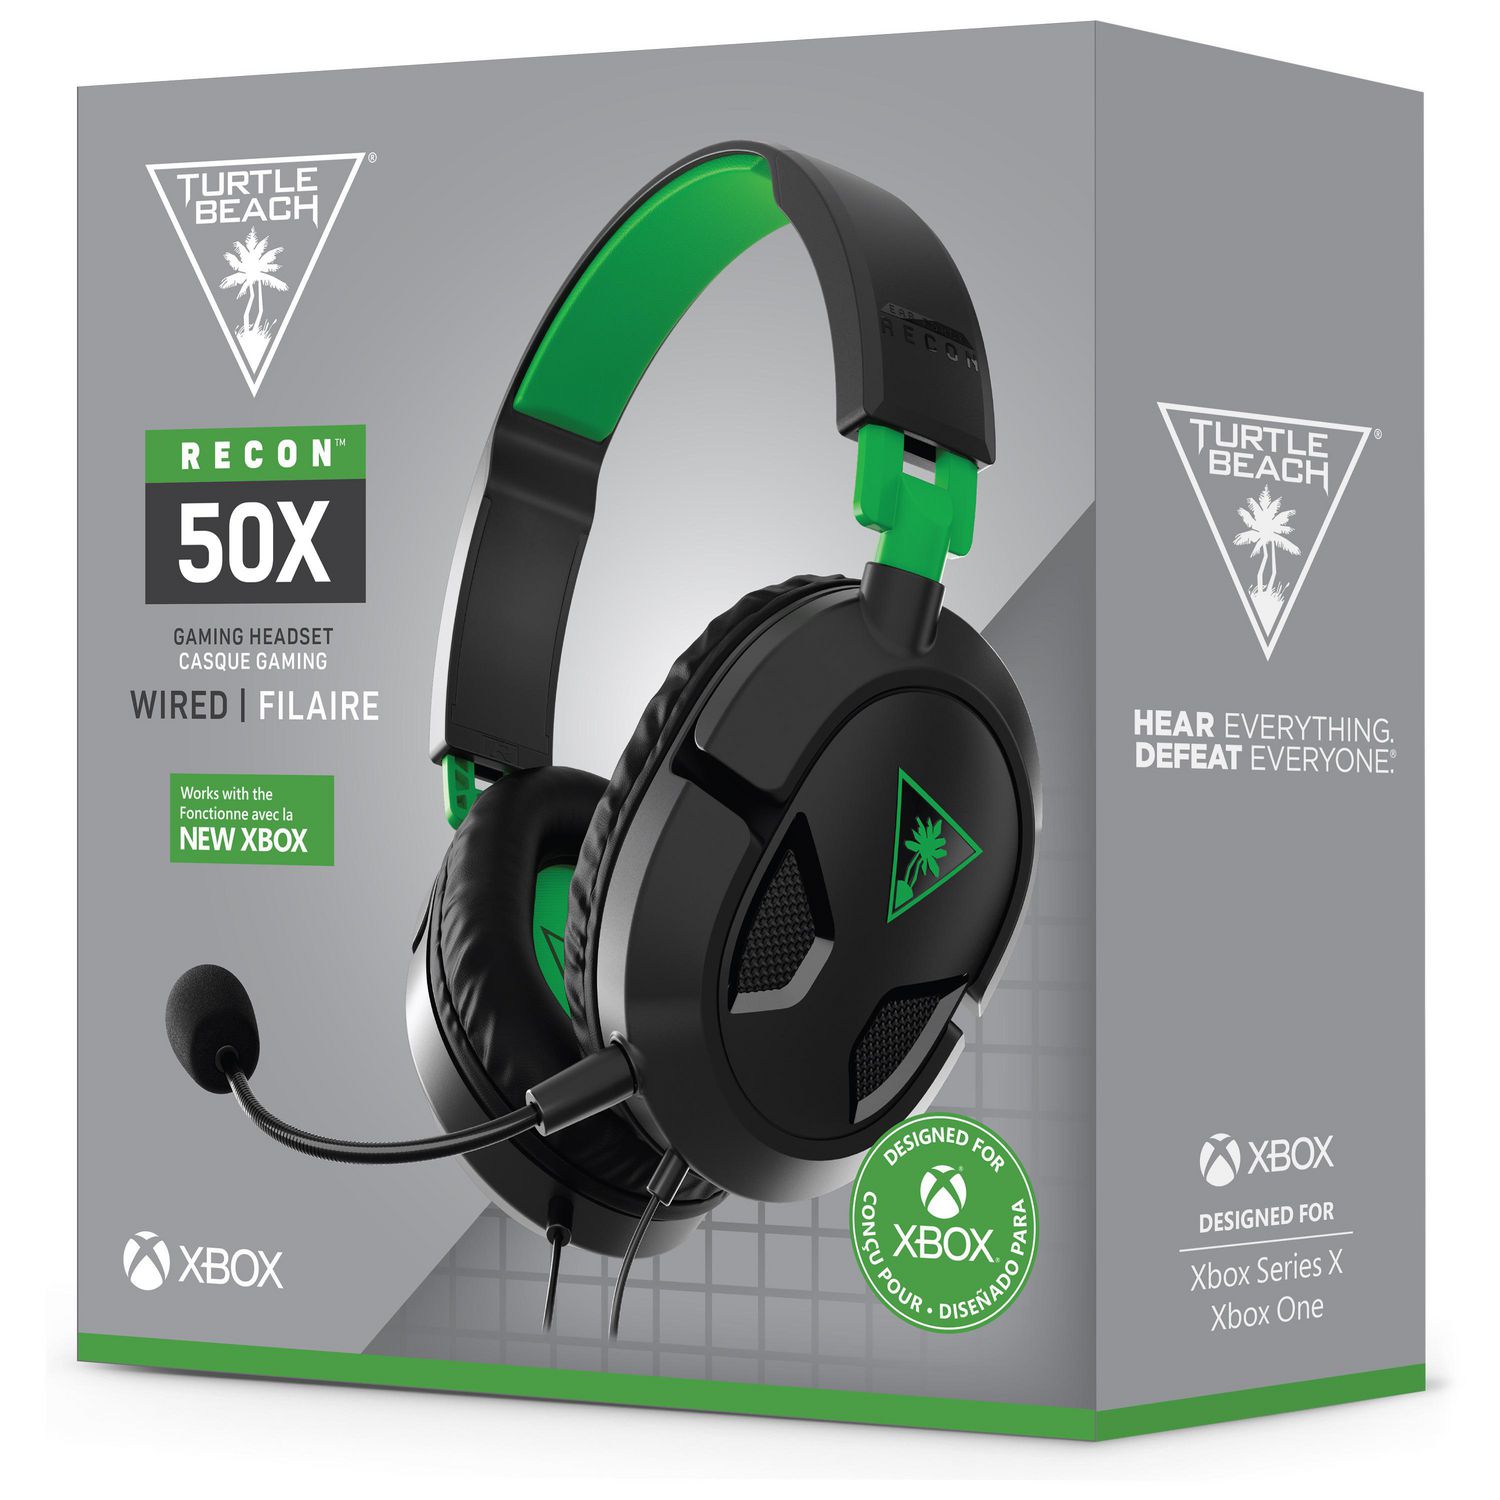 TURTLE BEACH® RECON 50X Gaming Headset for Xbox One & Xbox Series